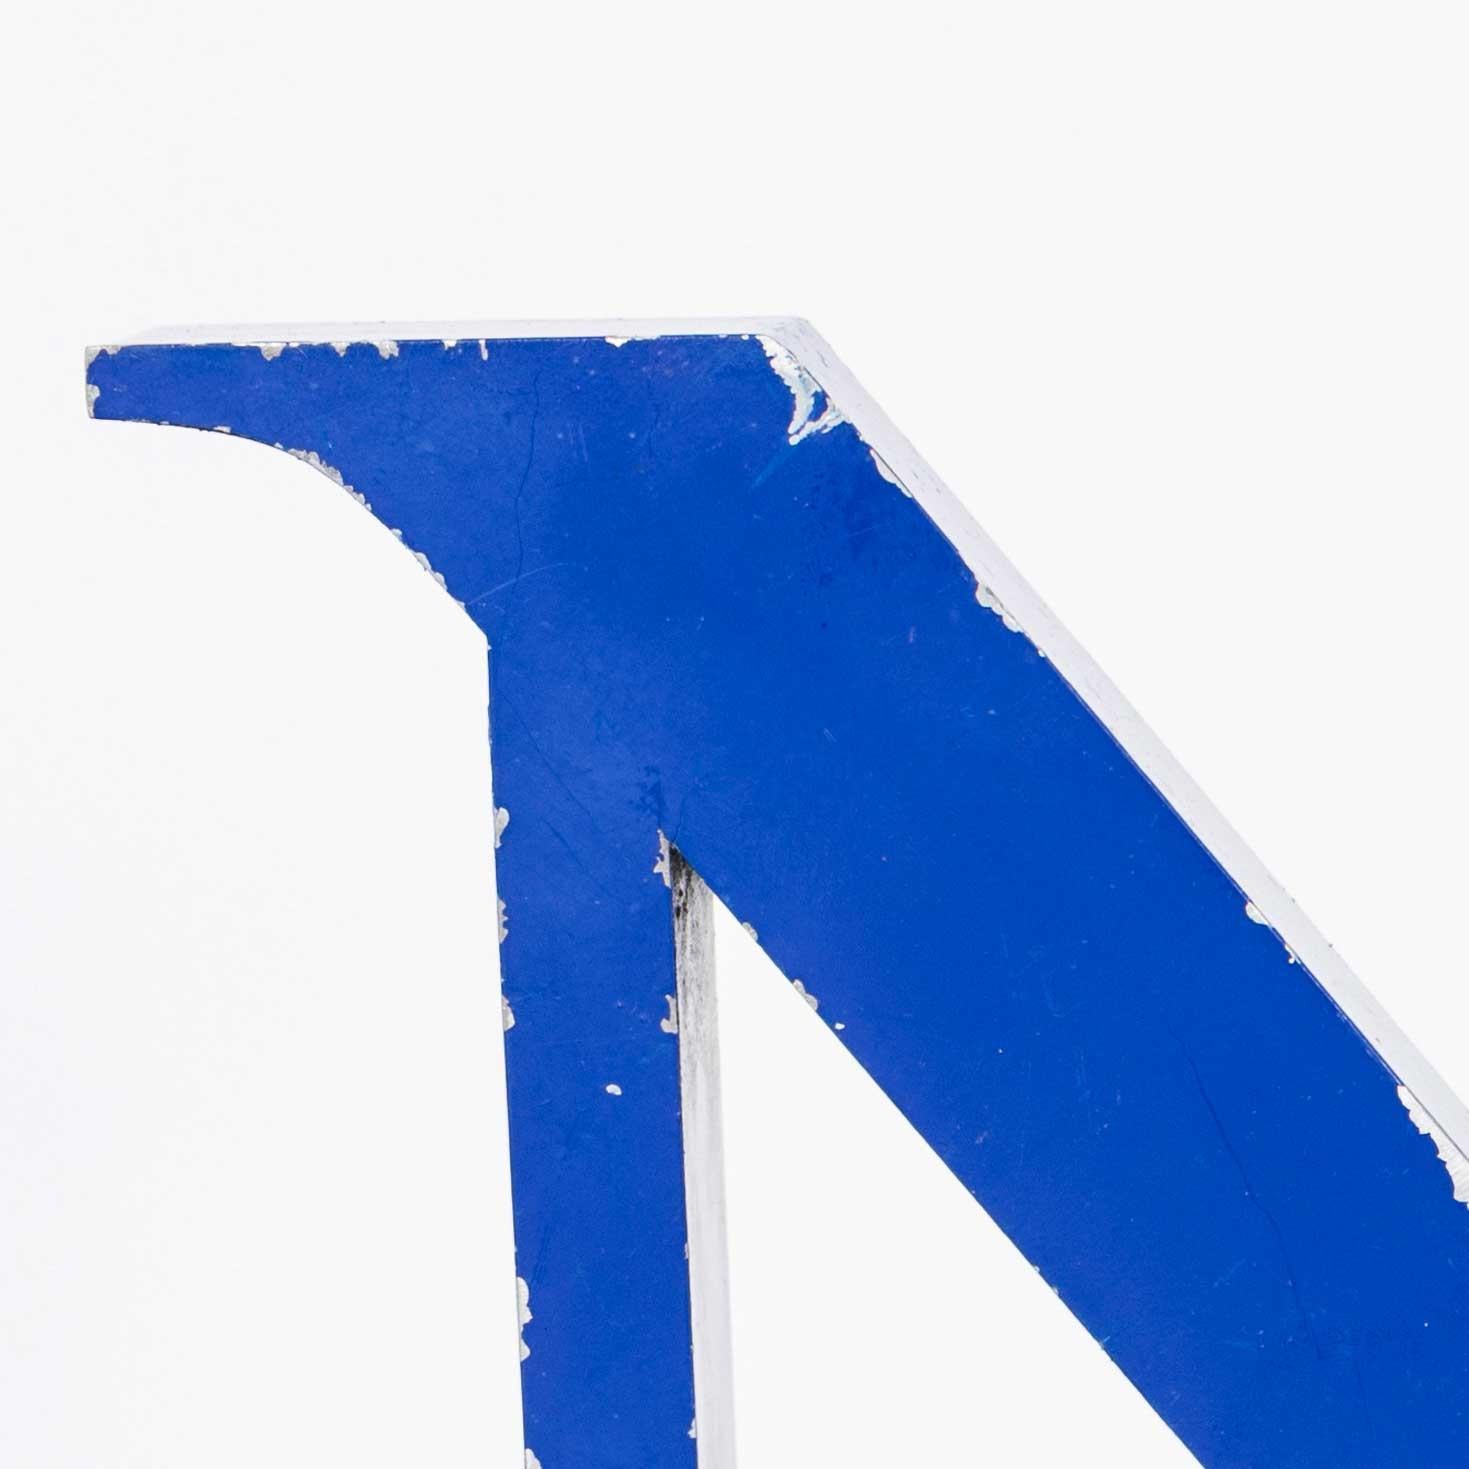 Vintage Blue Metal Letter – Medium N
Vintage Blue Metal Letter. Good sized metal signage letter with faded original blue paint. Size 5x27x29 – D/H/W all cm.

WORKSHOP REPORT
Our workshop team inspect every product and carry out any needed repairs to